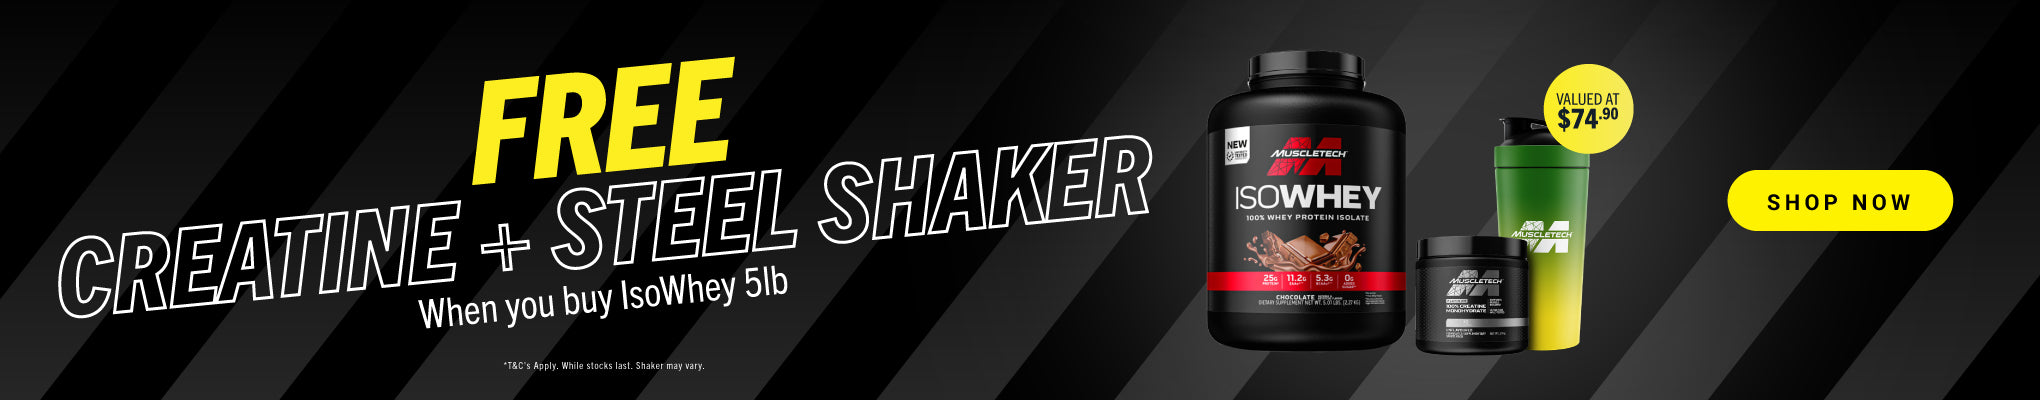 March MuscleTech Deal - FREE CREATINE + SHAKER